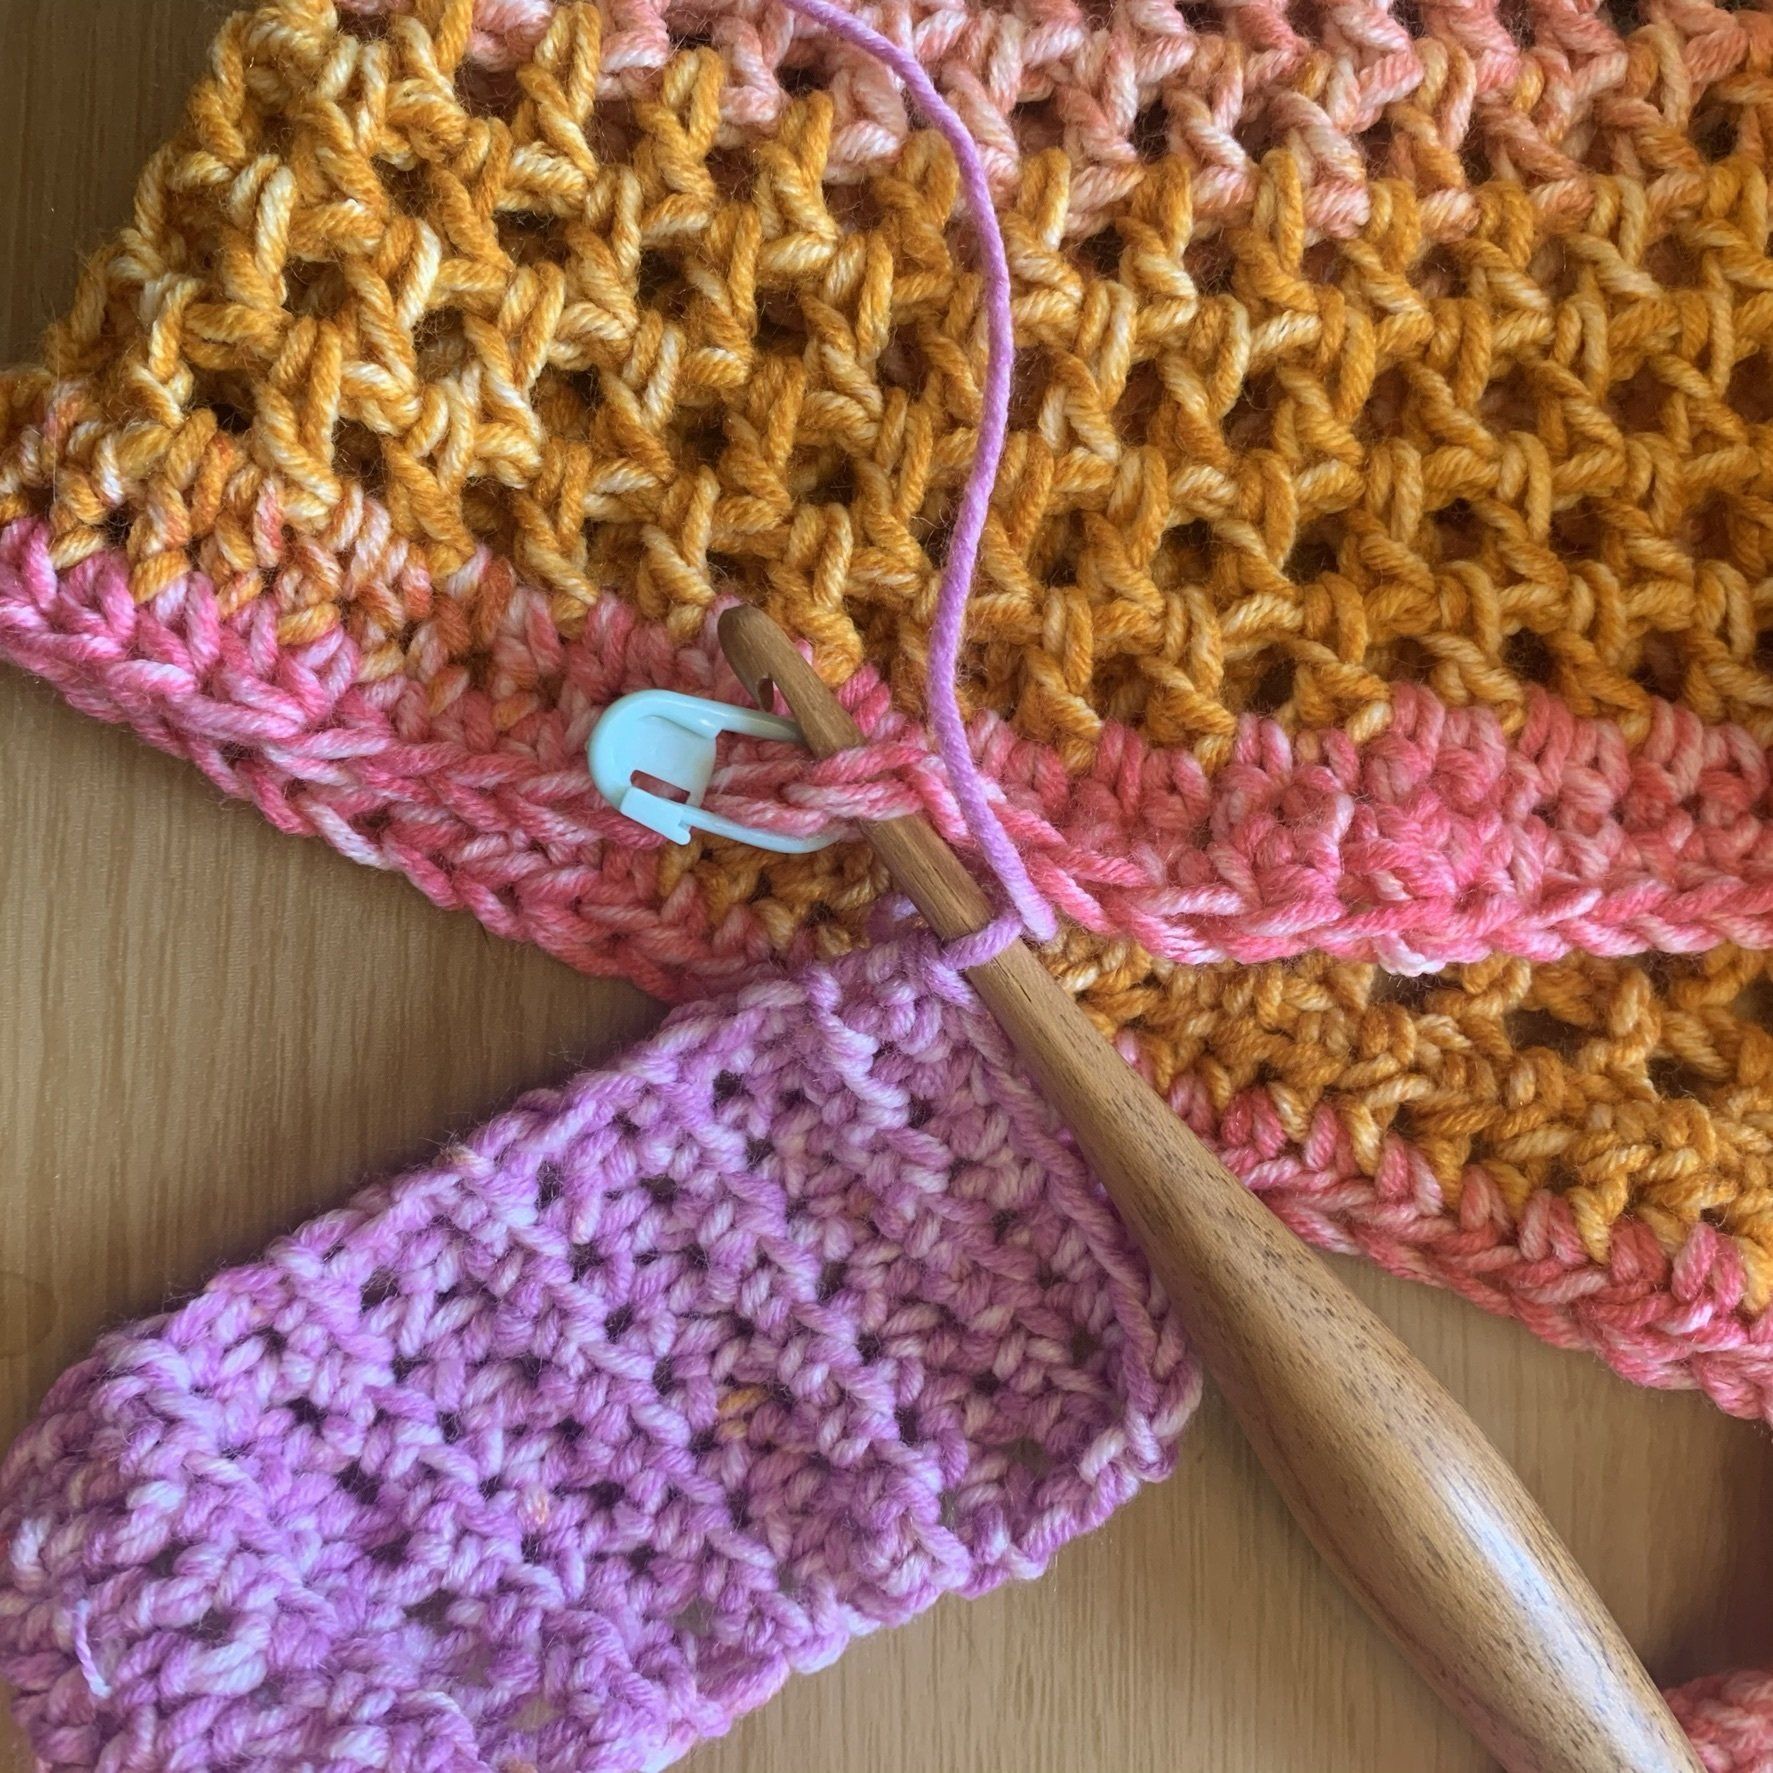 How to crochet a mesh market bag with this free pattern